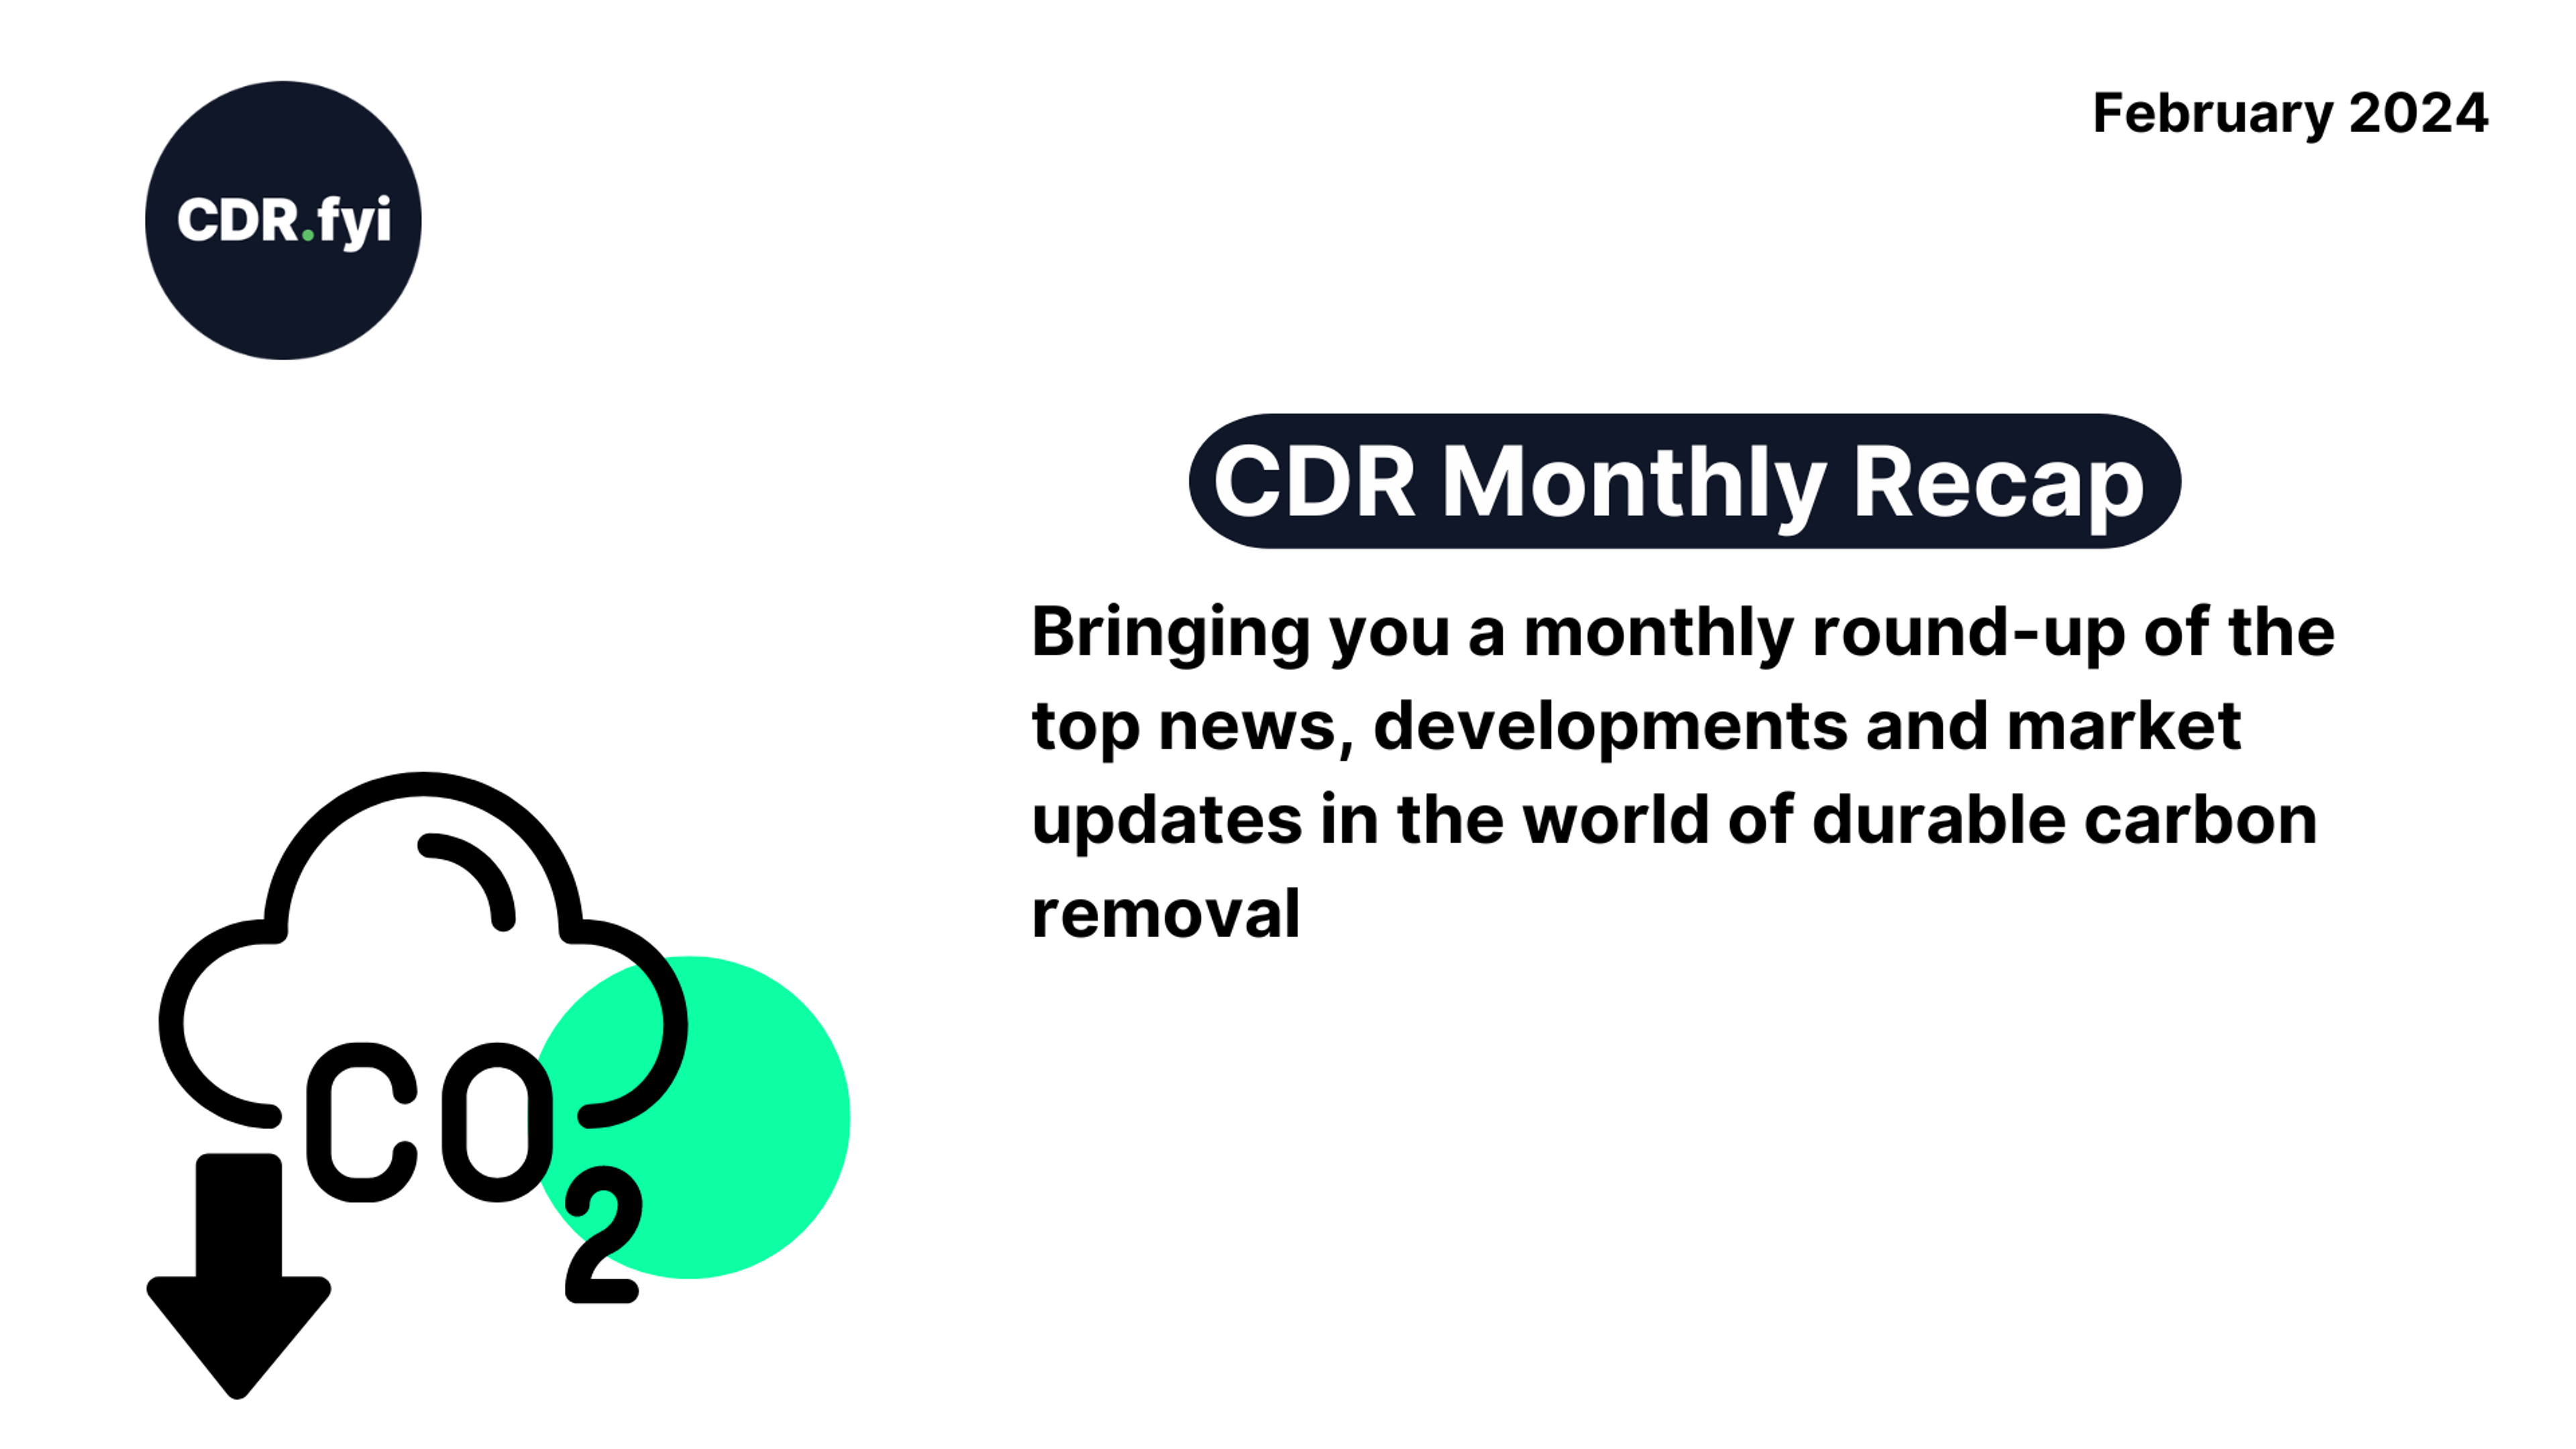 CDR Monthly Recap - February 2024 blog post image